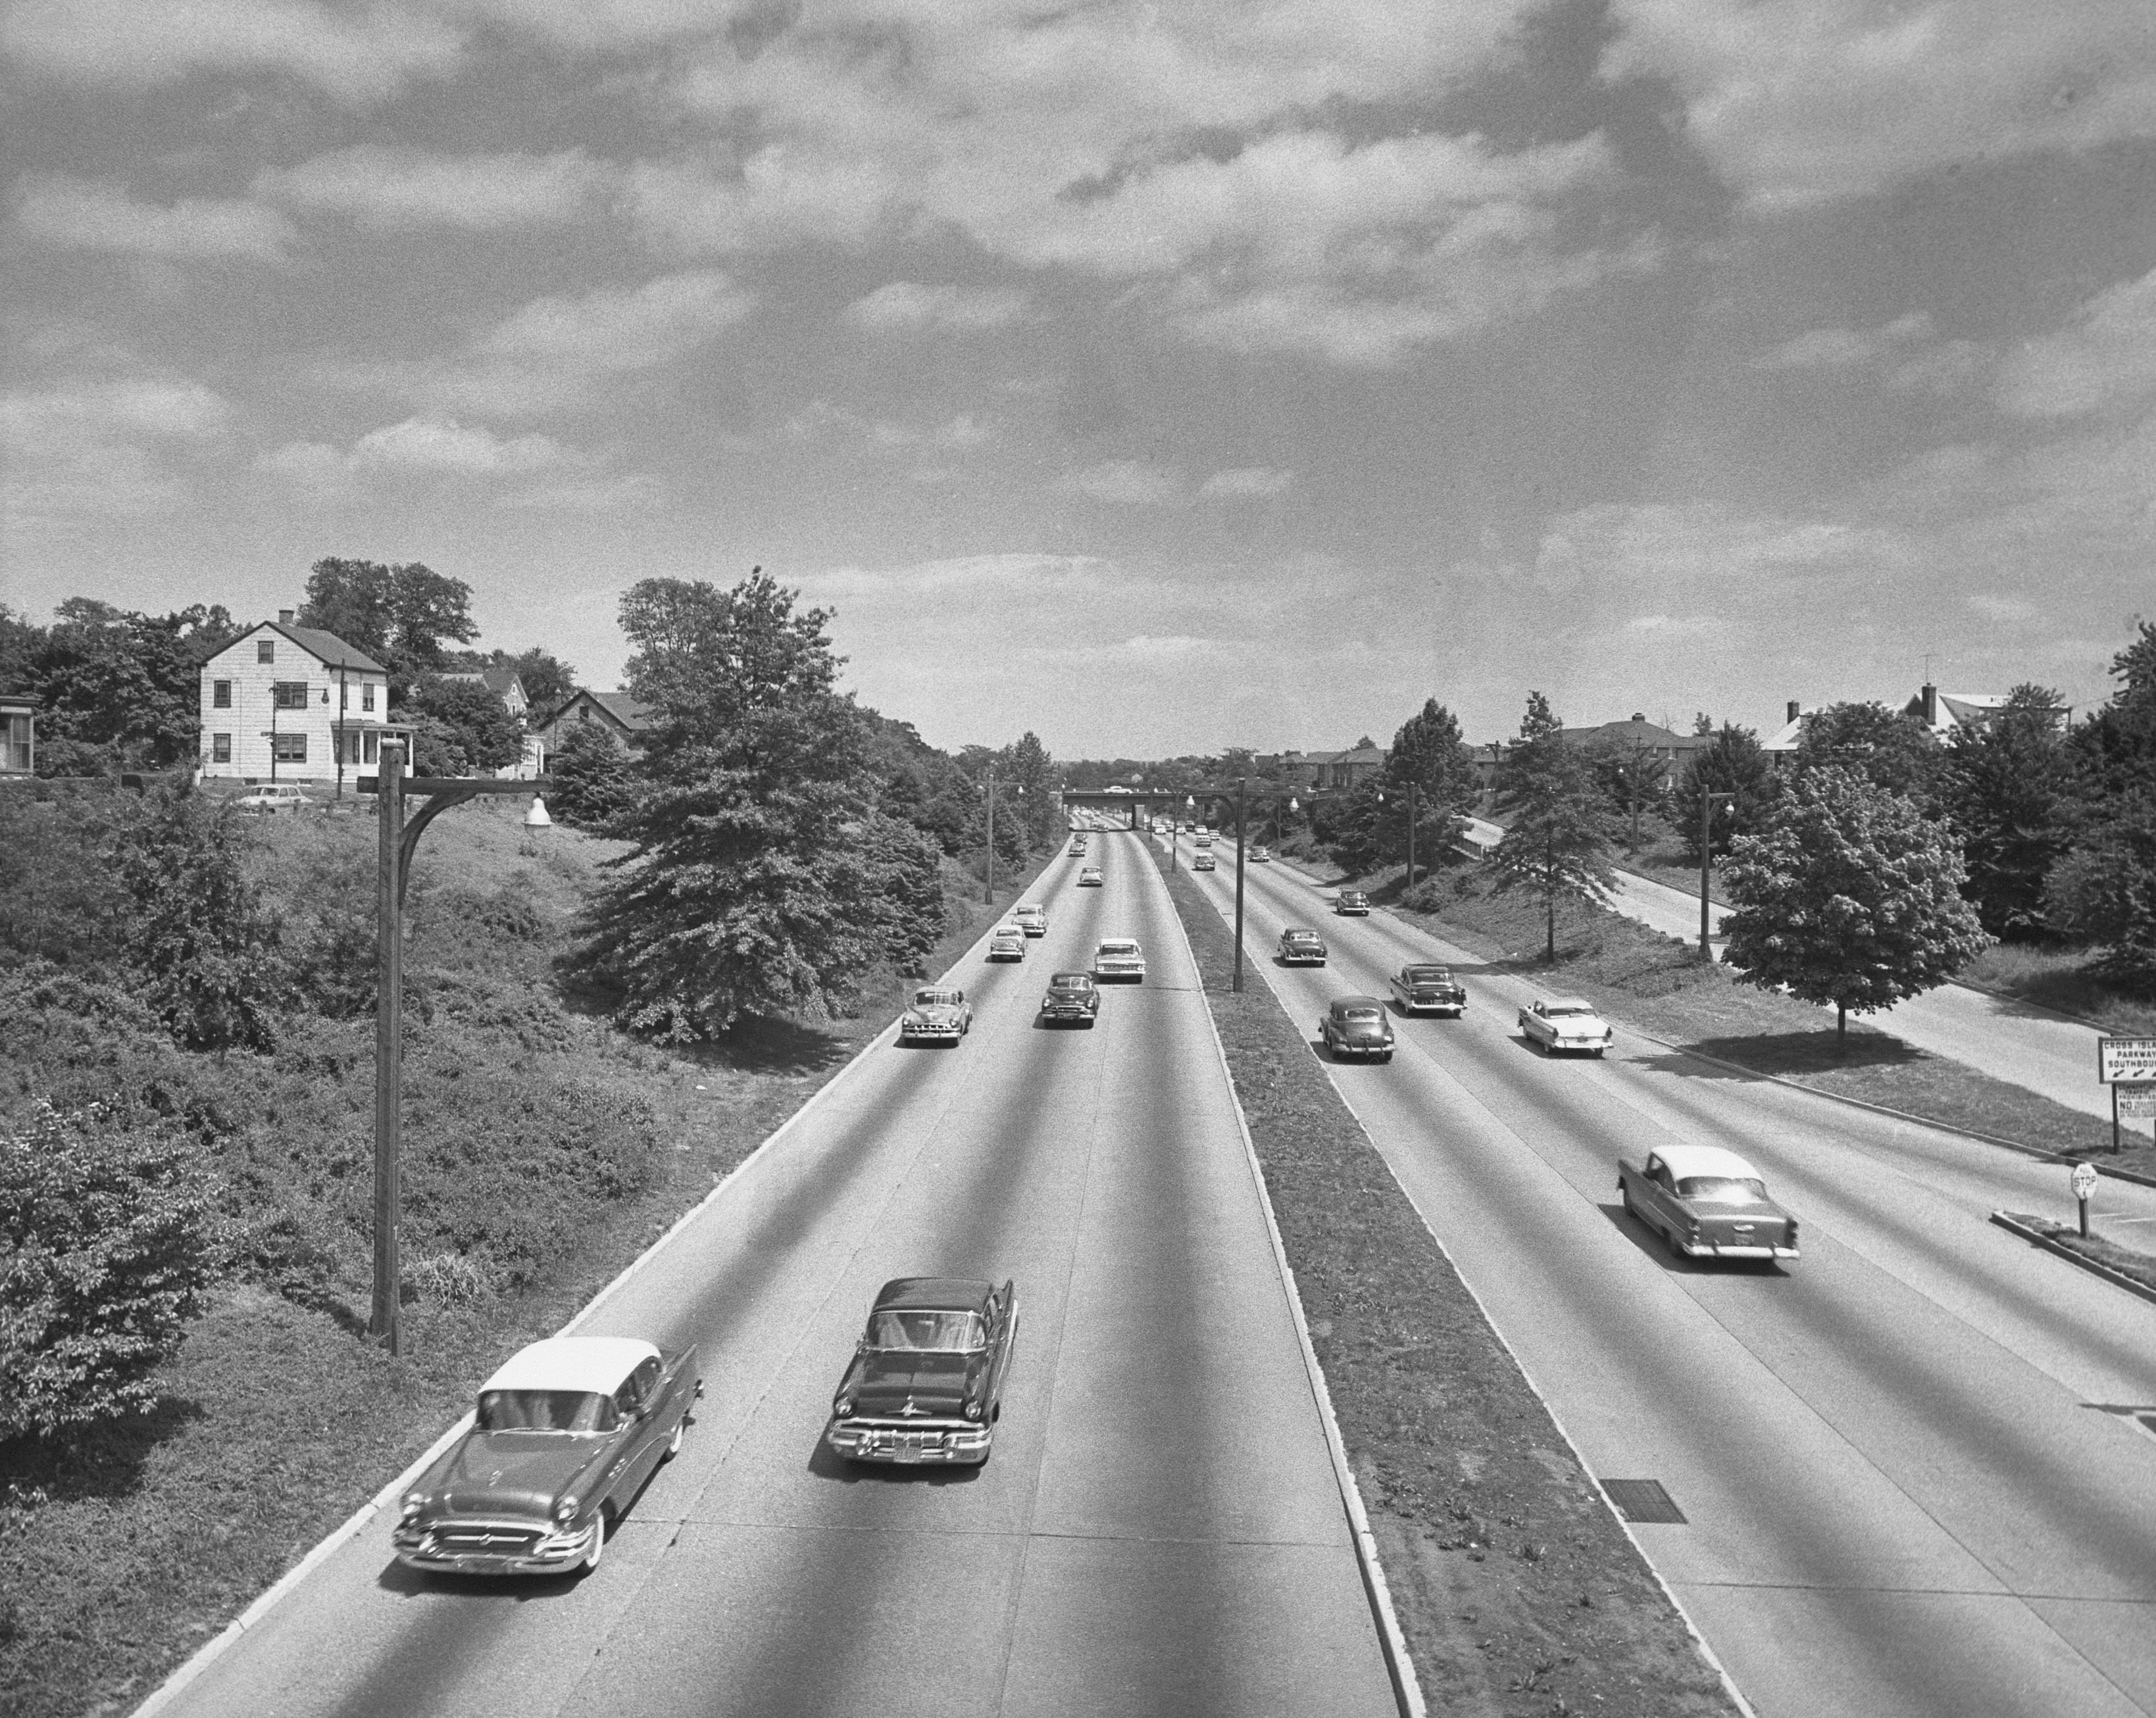 The hero of Amor Towles’ novel The Lincoln Highway embarks on a road trip through 1950s America with his younger brother and two fellow teens. Photo: George Marks/Retrofile/Getty Images